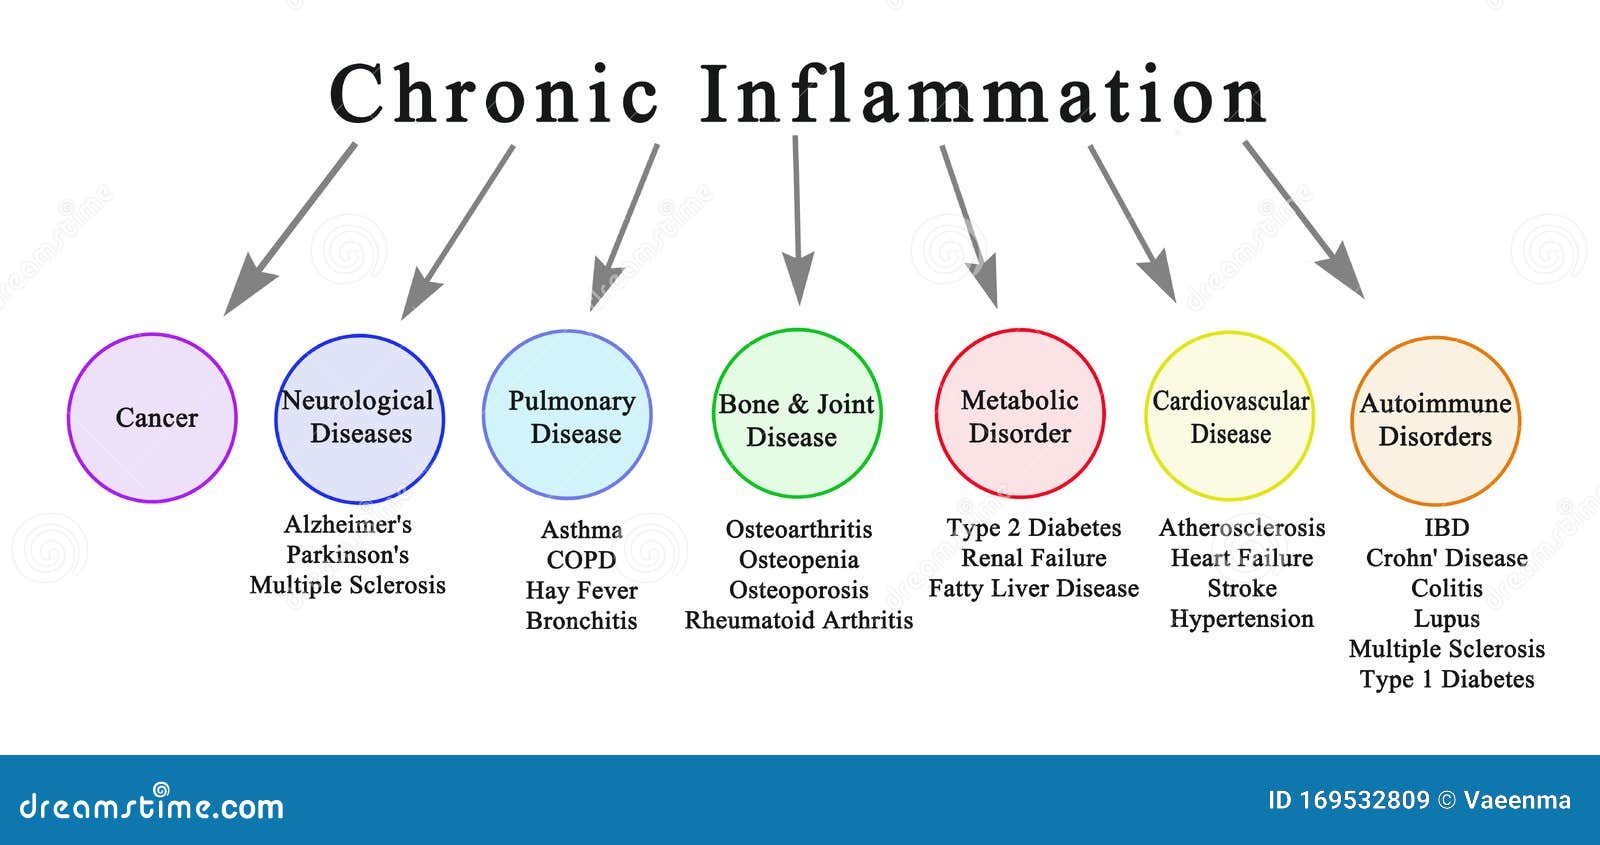 consequences of chronic inflammation